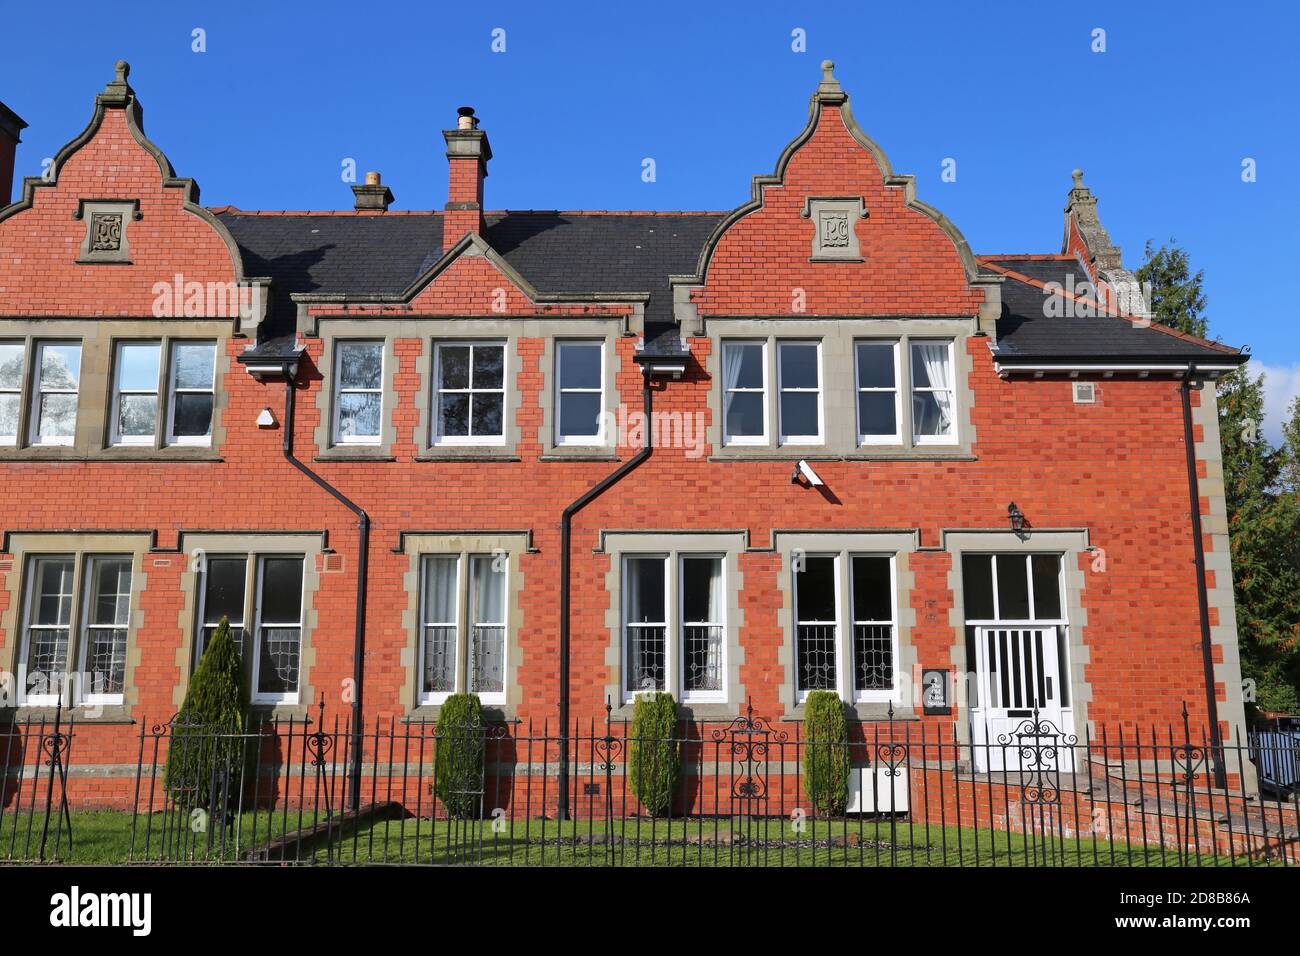 Former Police Station, County Buildings, High Street, Llandrindod Wells, Radnorshire, Powys, Wales, Great Britain, United Kingdom, UK, Europe Stock Photo